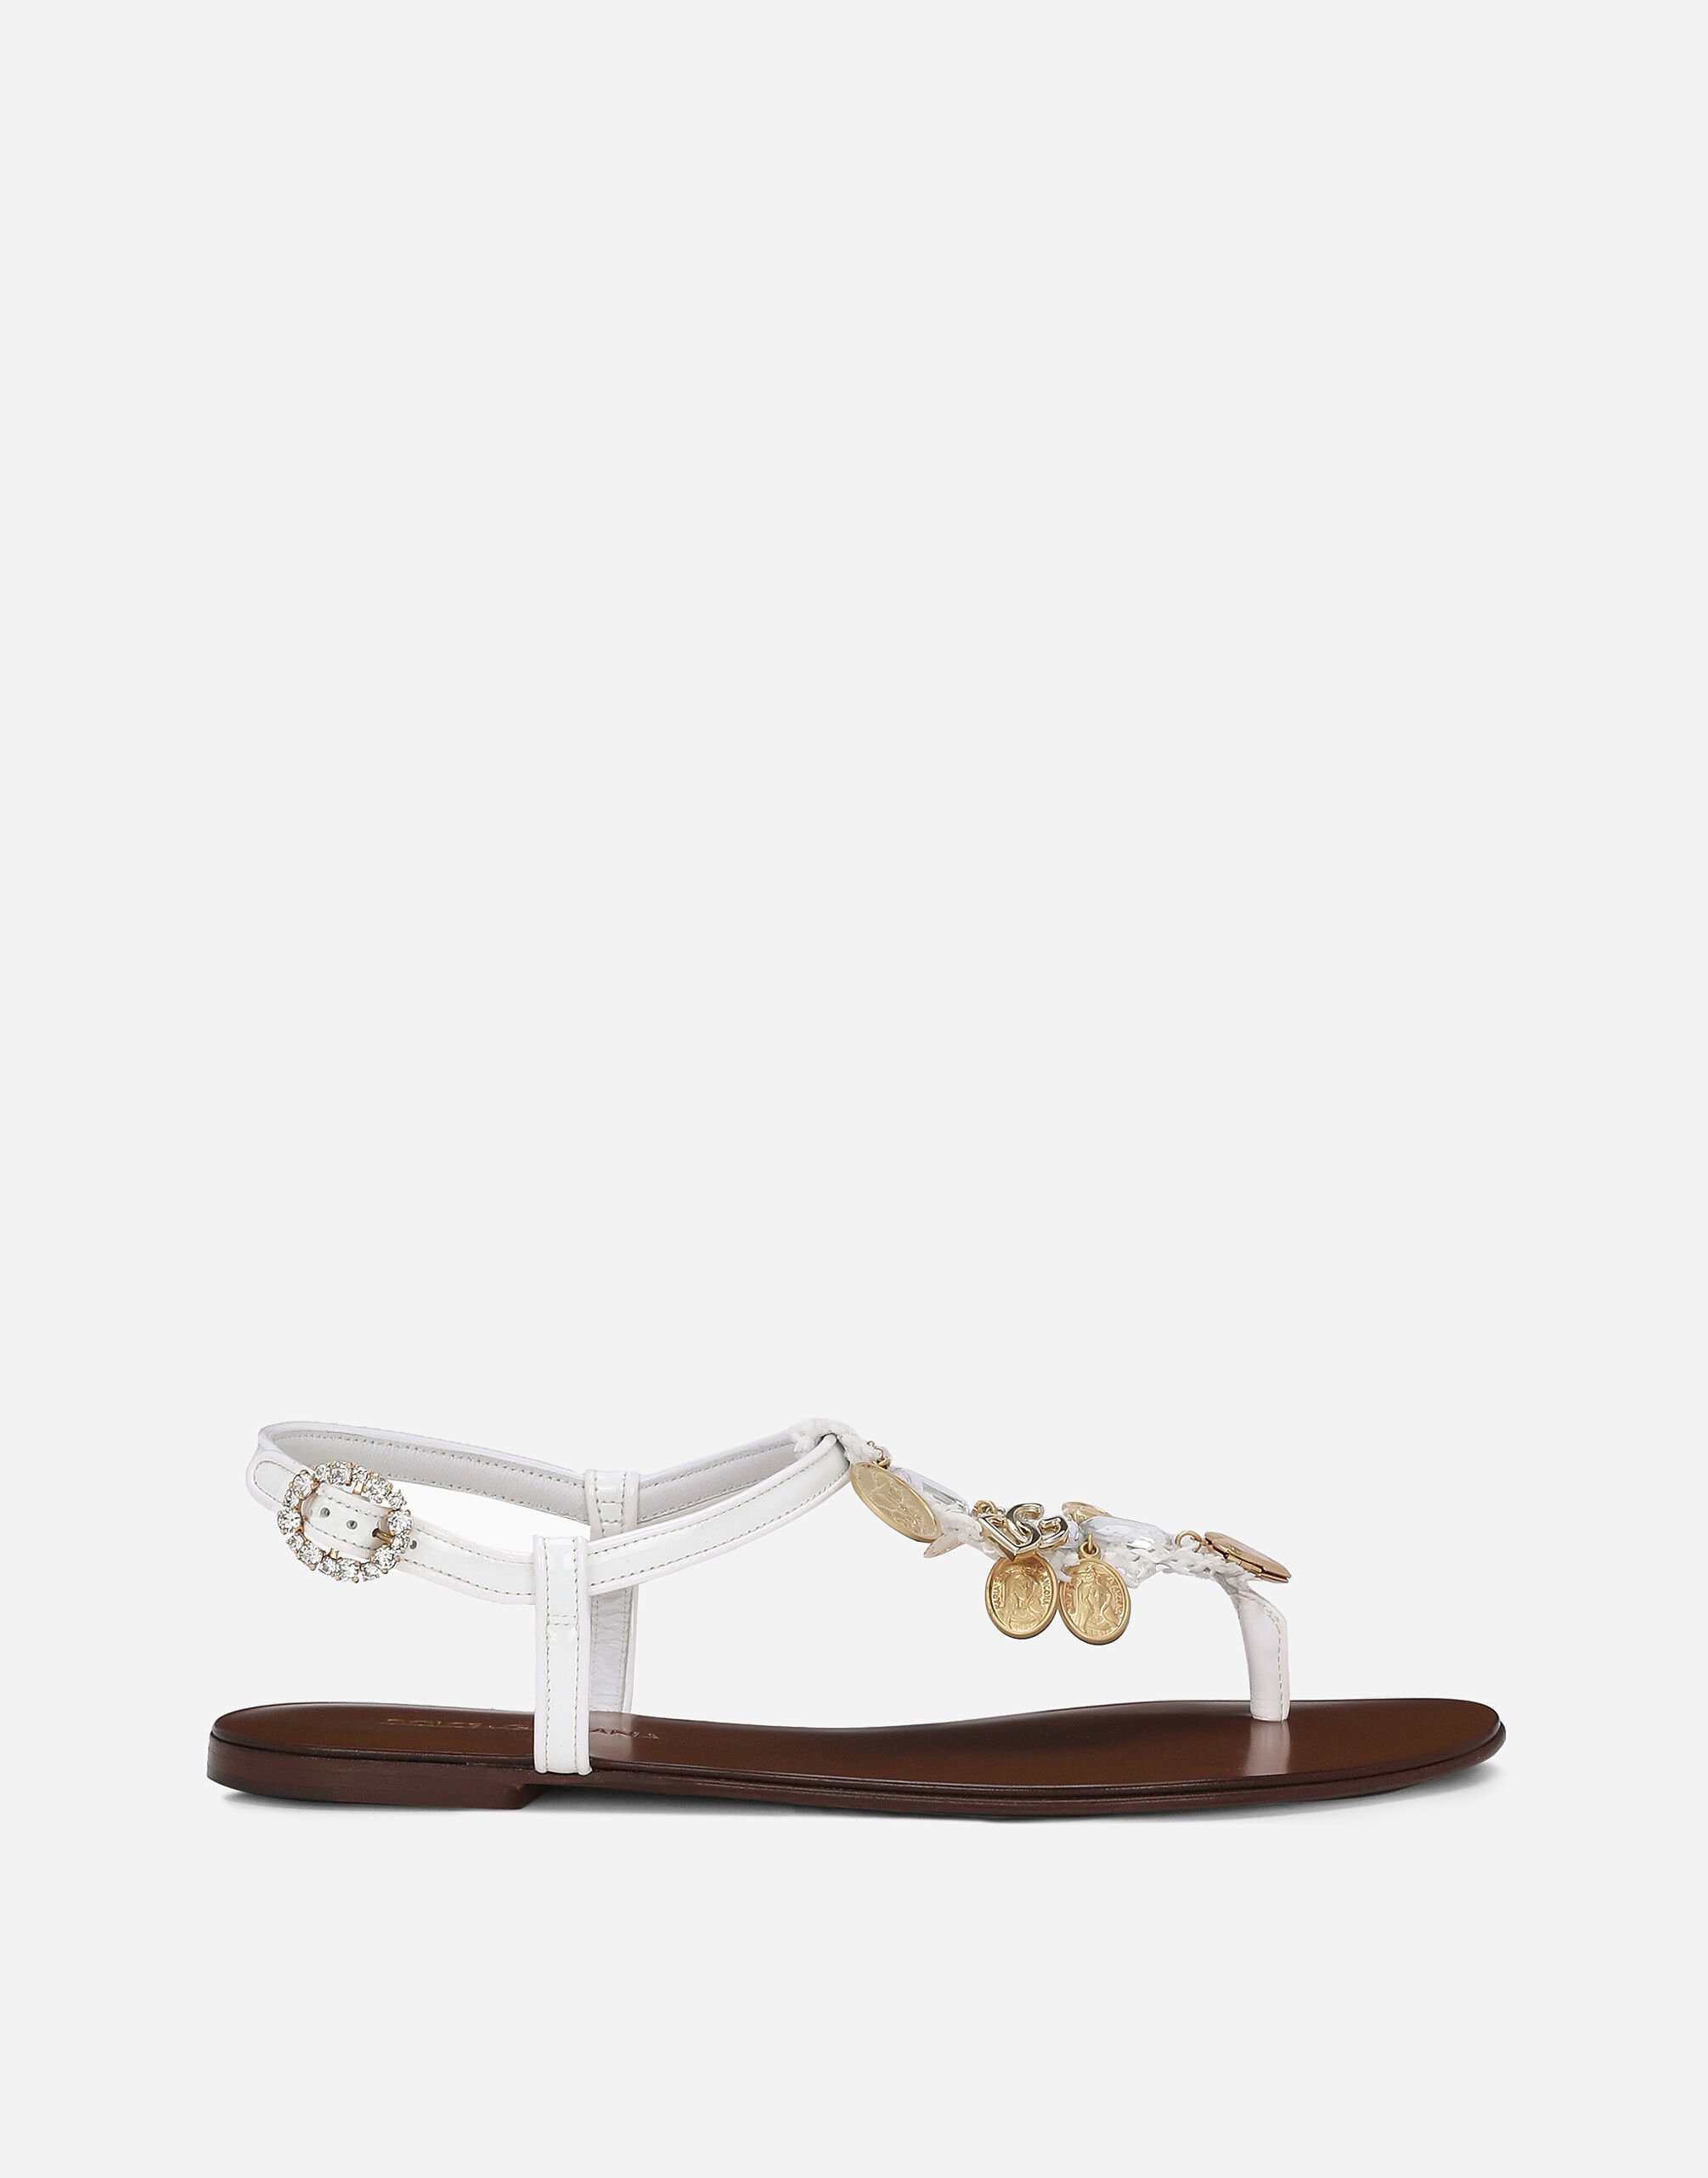 Dolce & Gabbana Raffia thong sandals with embroidered votive medallions White CK2288A5355